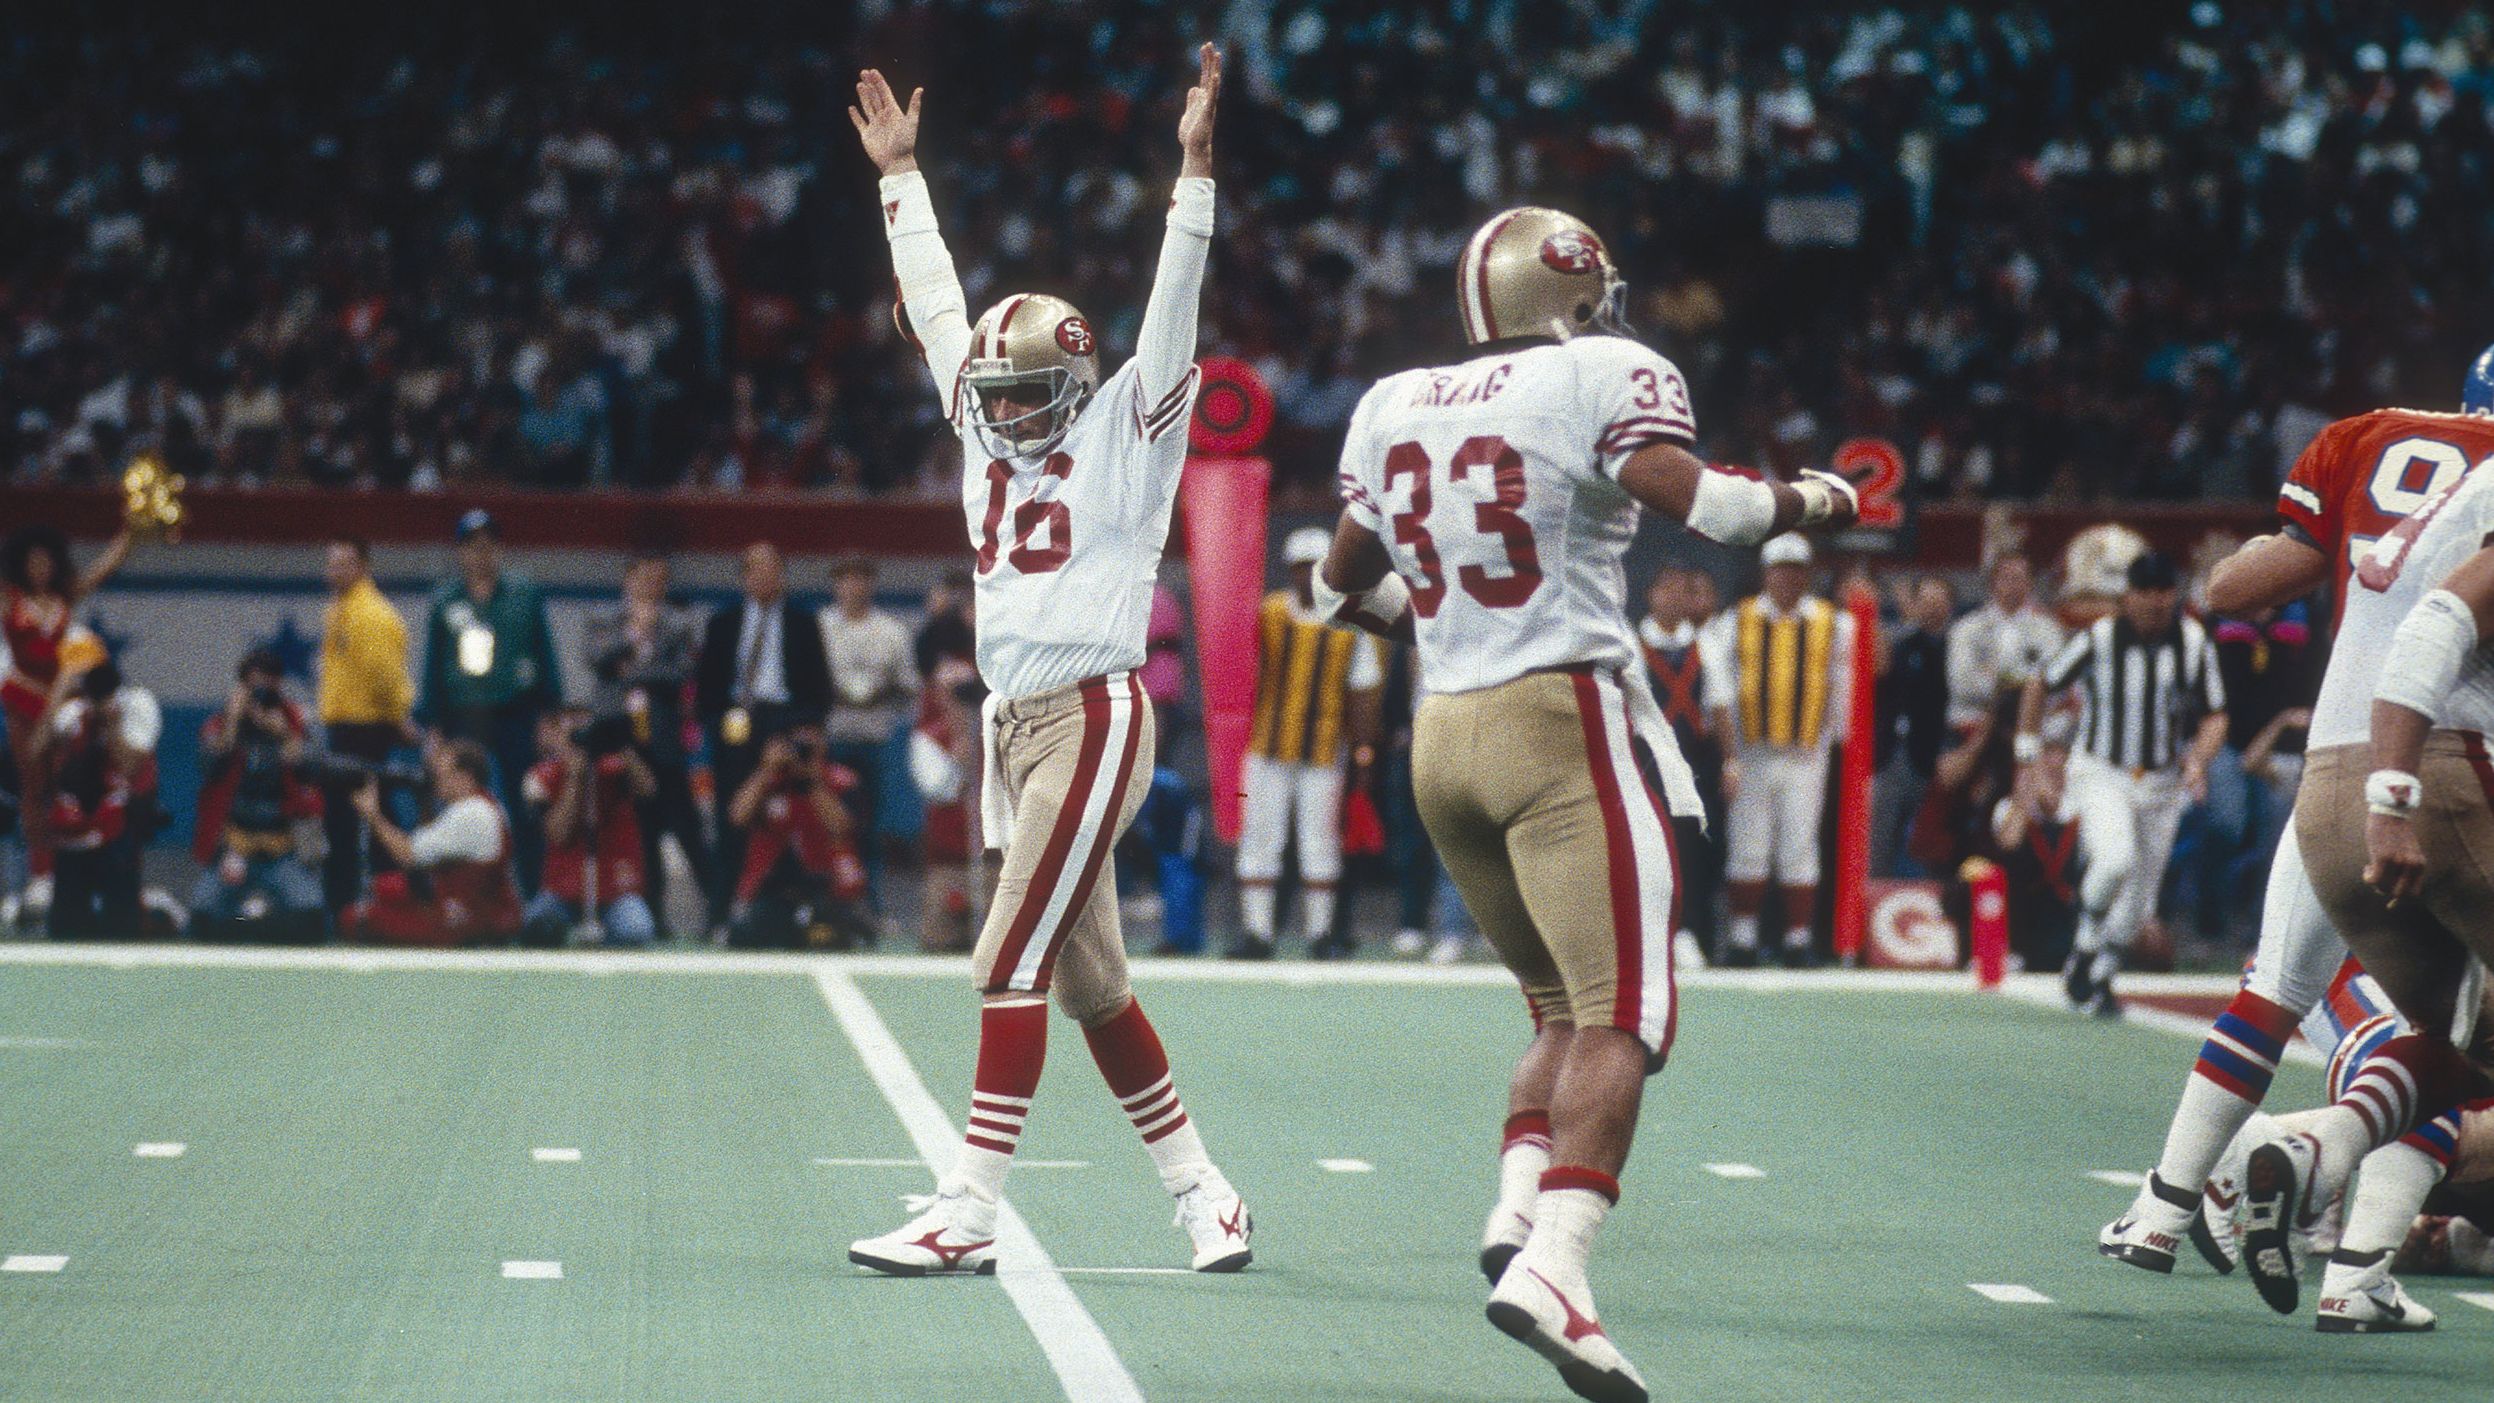 <strong>Super Bowl XXIV (1990):</strong> San Francisco quarterback Joe Montana raises his arms in celebration after a 49ers touchdown in Super Bowl XXIV. Montana had 297 yards passing and five touchdowns as the 49ers defeated Denver 55-10. It was the biggest blowout in Super Bowl history. Montana collected his third MVP award, and the 49ers capped a glorious run with four titles in nine years.